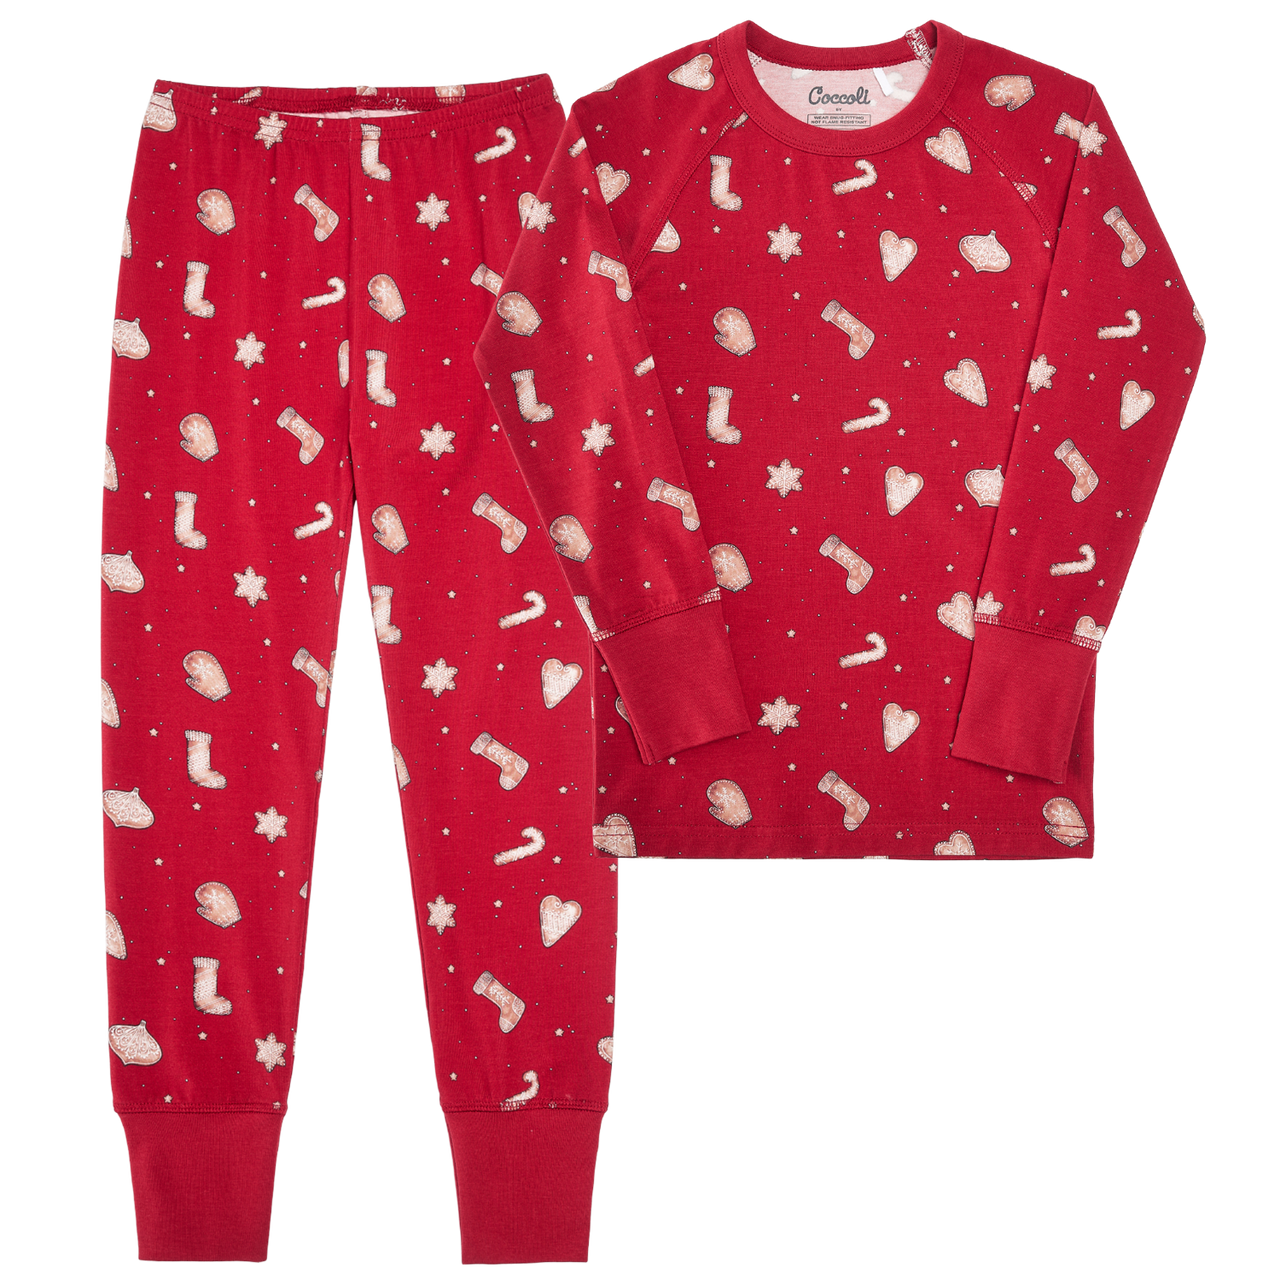 Coccoli Red Biscuits Pajama Set